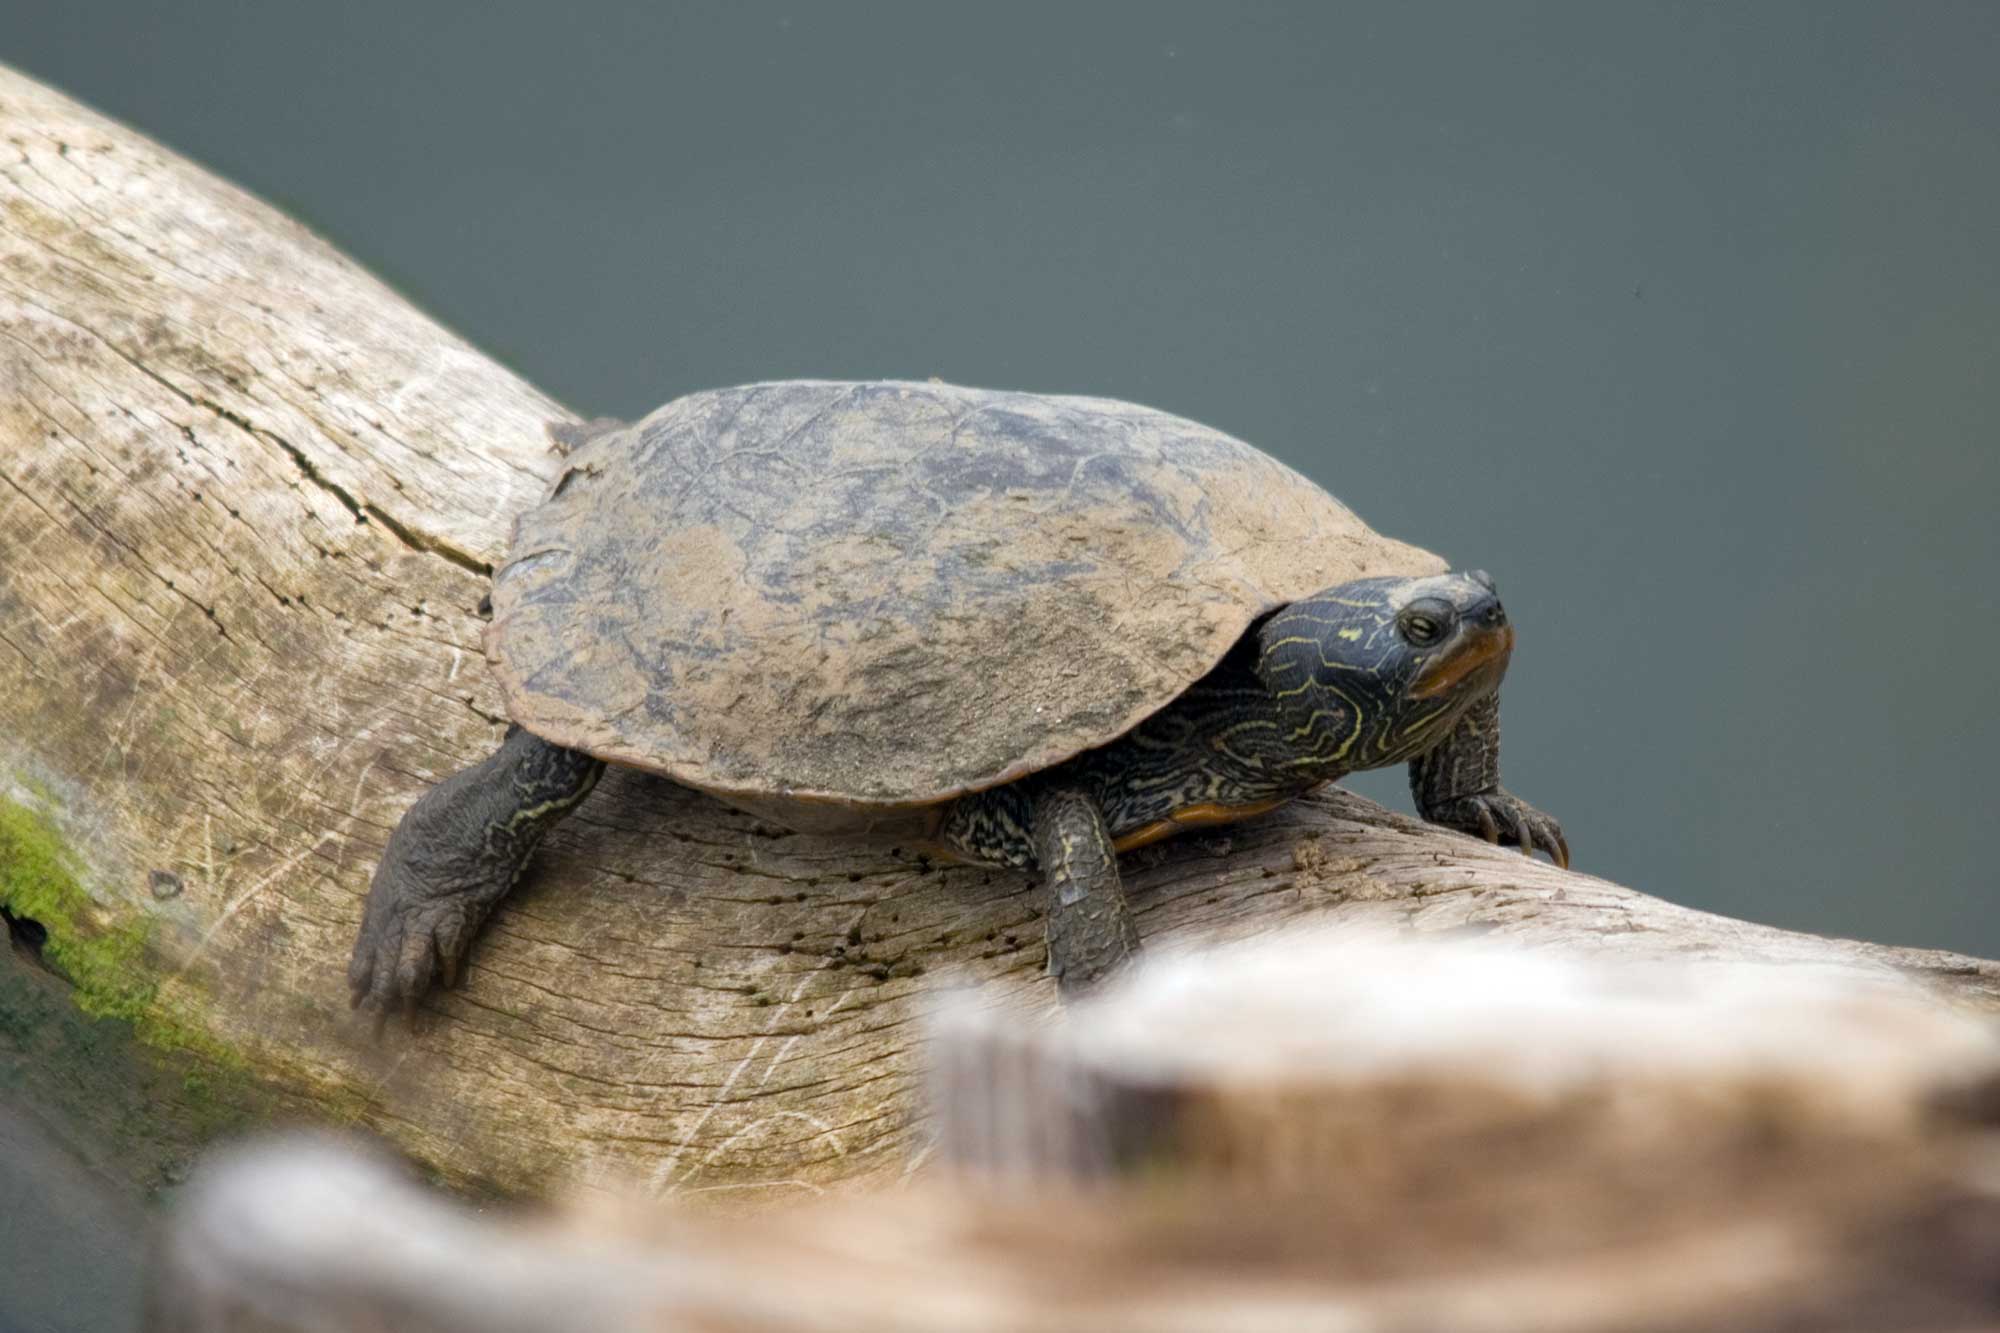 A northern map turtle on tree bark.